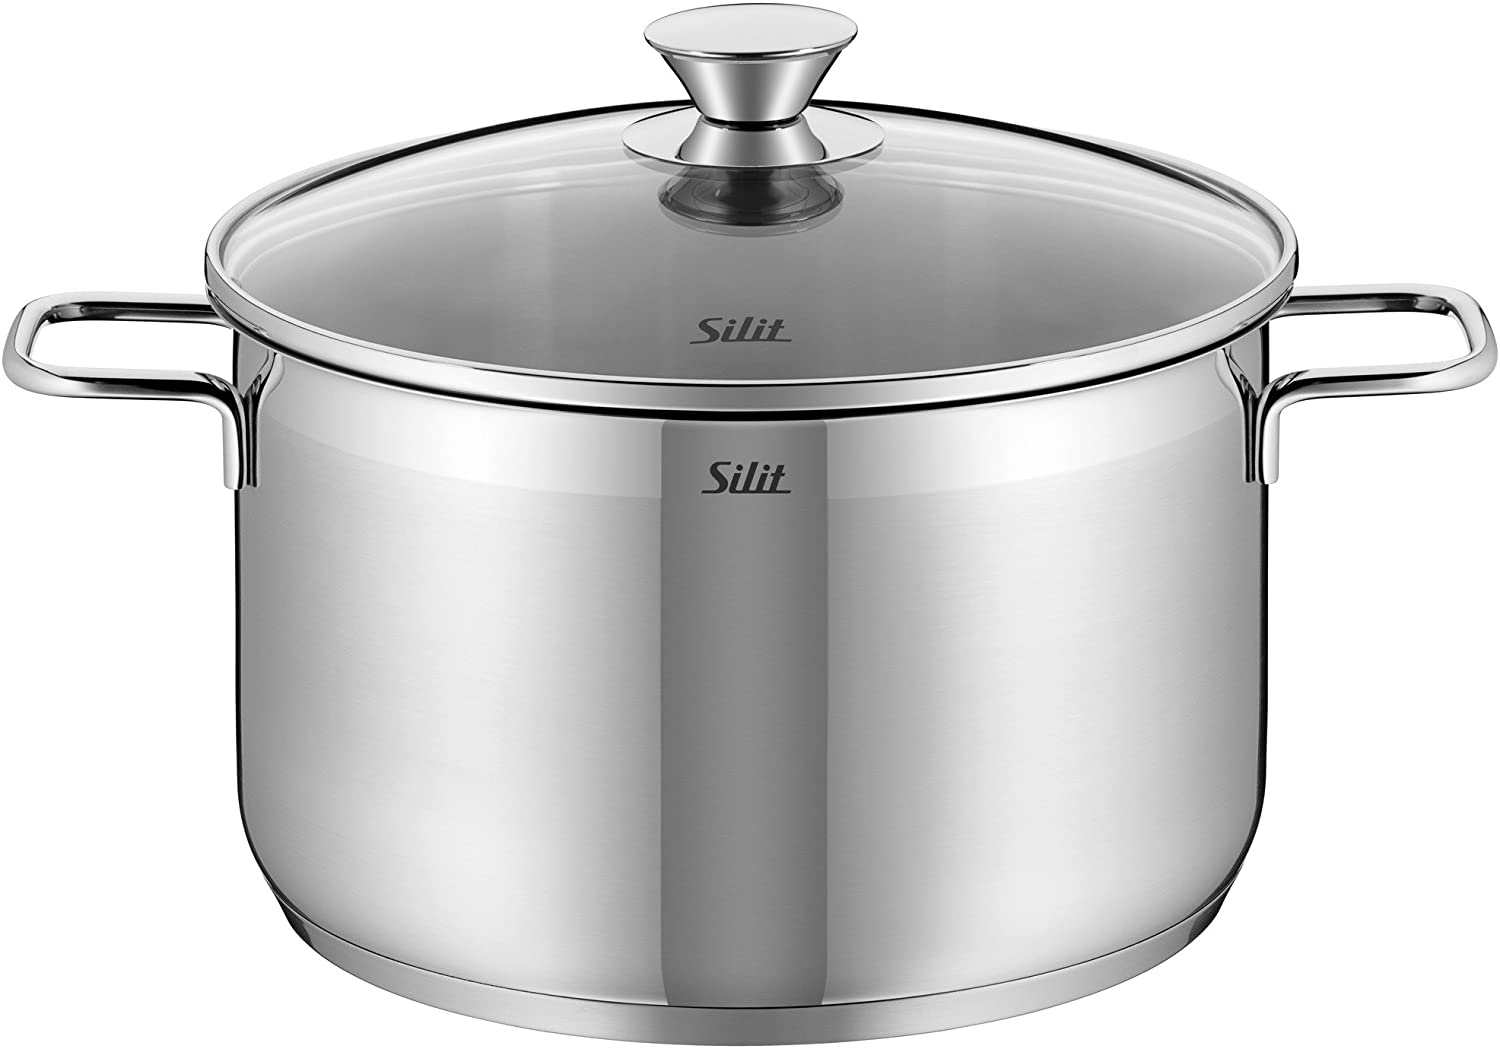 Silit Pisa High Saucepan in Polished Stainless Steel with Pouring Rim & Glass Lid, Induction & Dishwasher Safe